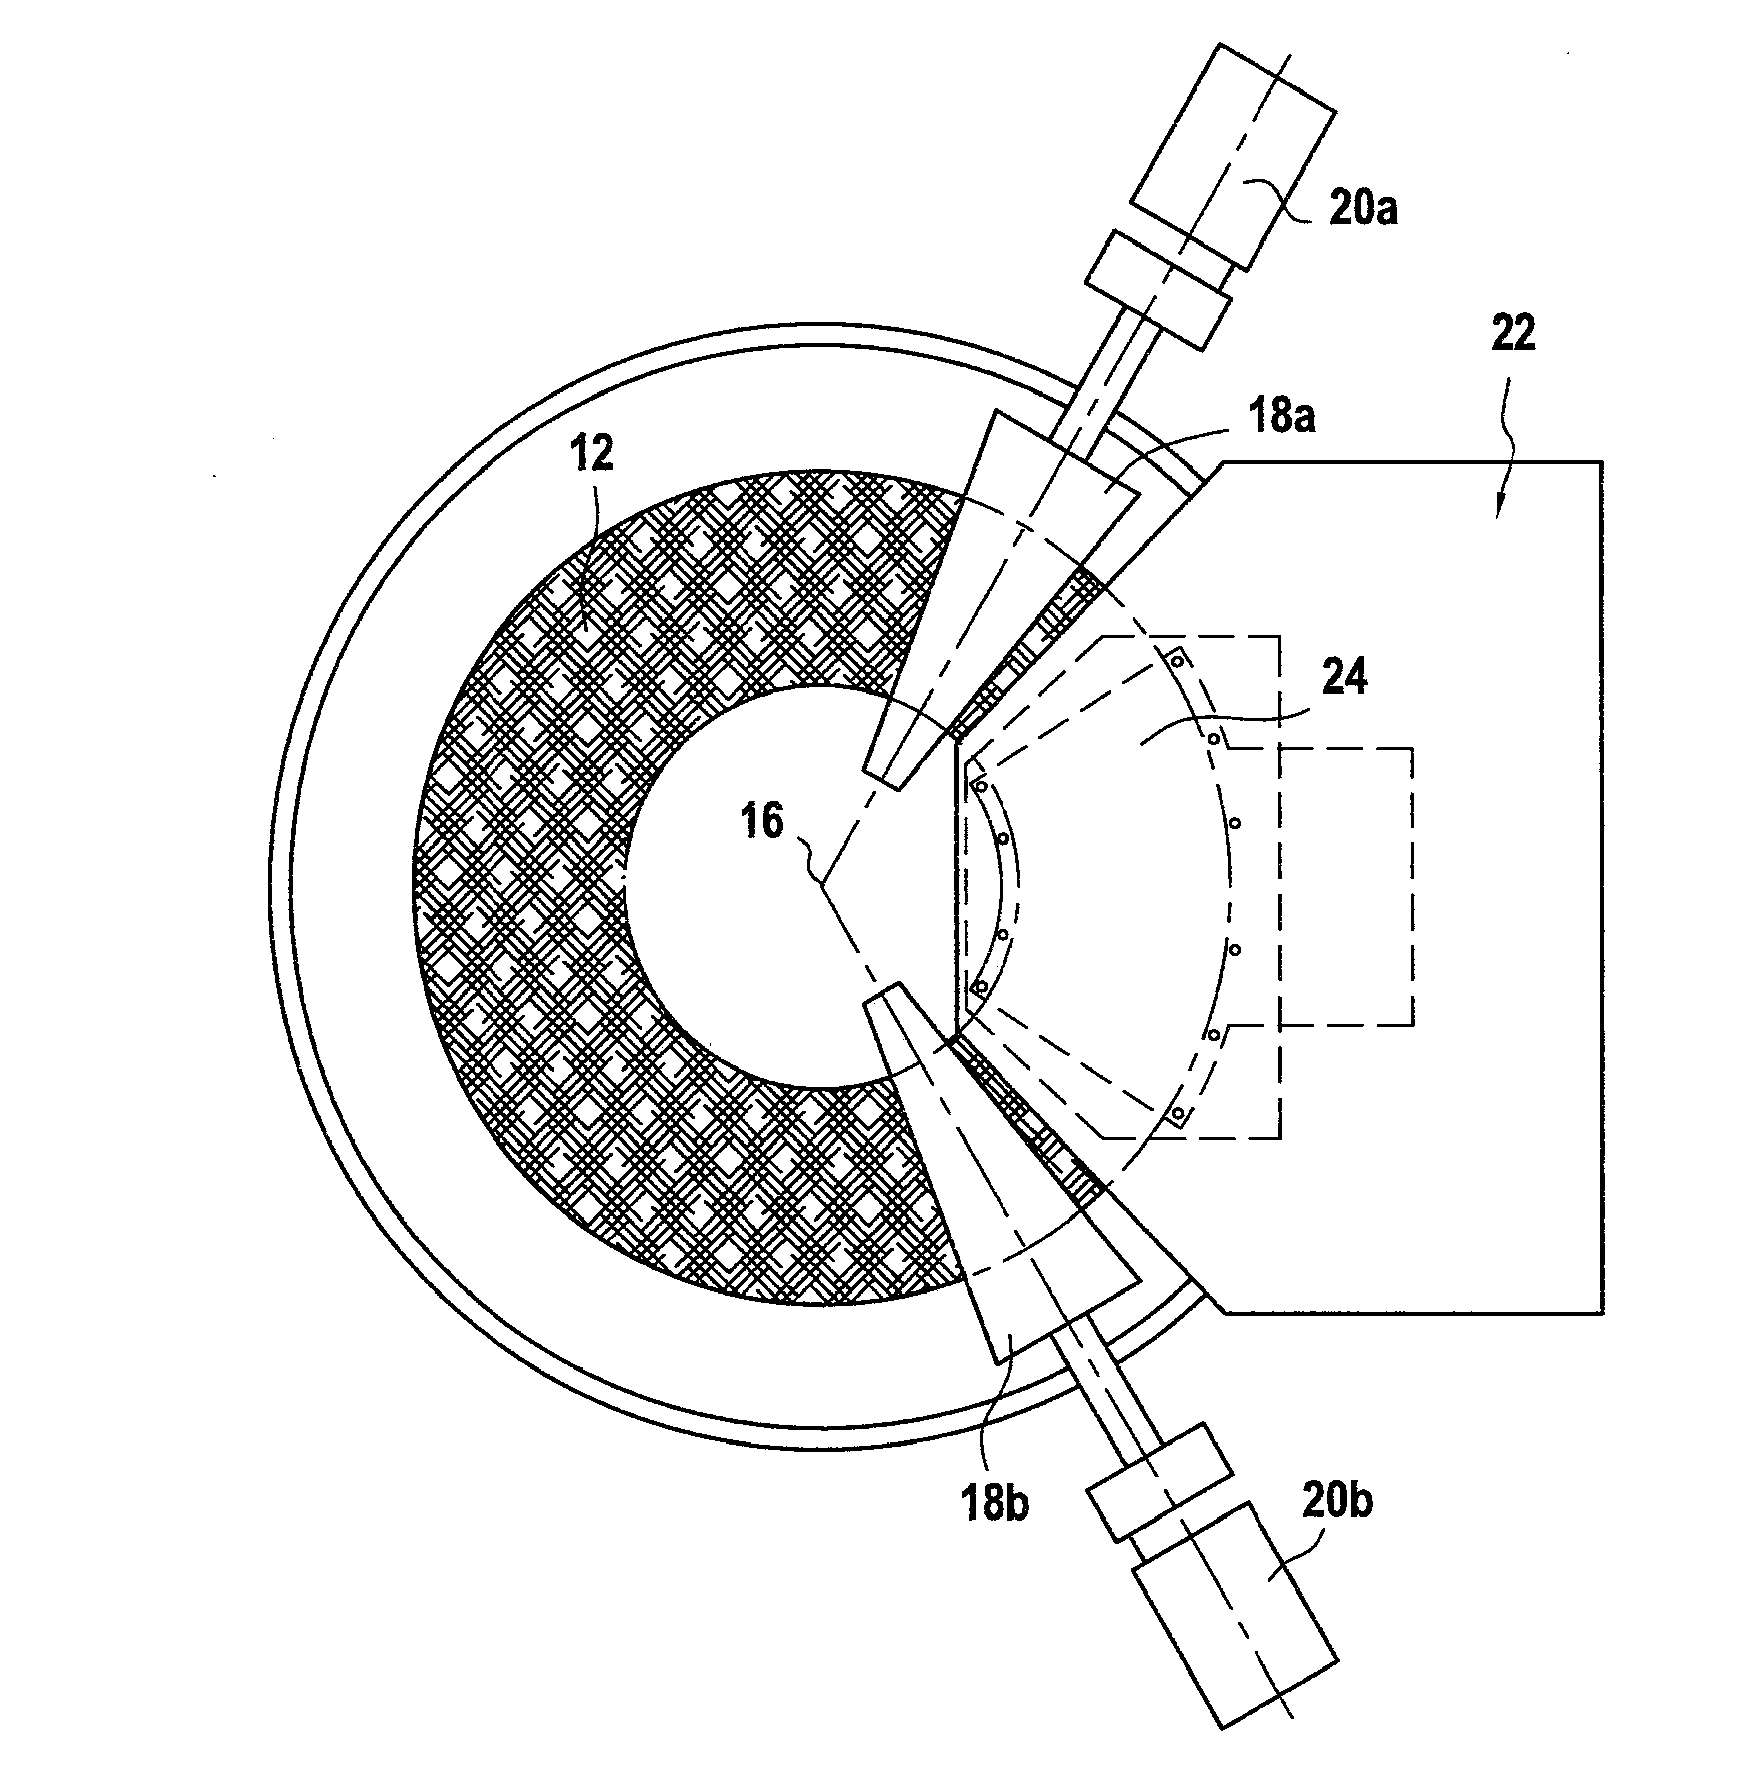 Circular needling table for needling a textile structure made from an annular fiber preform